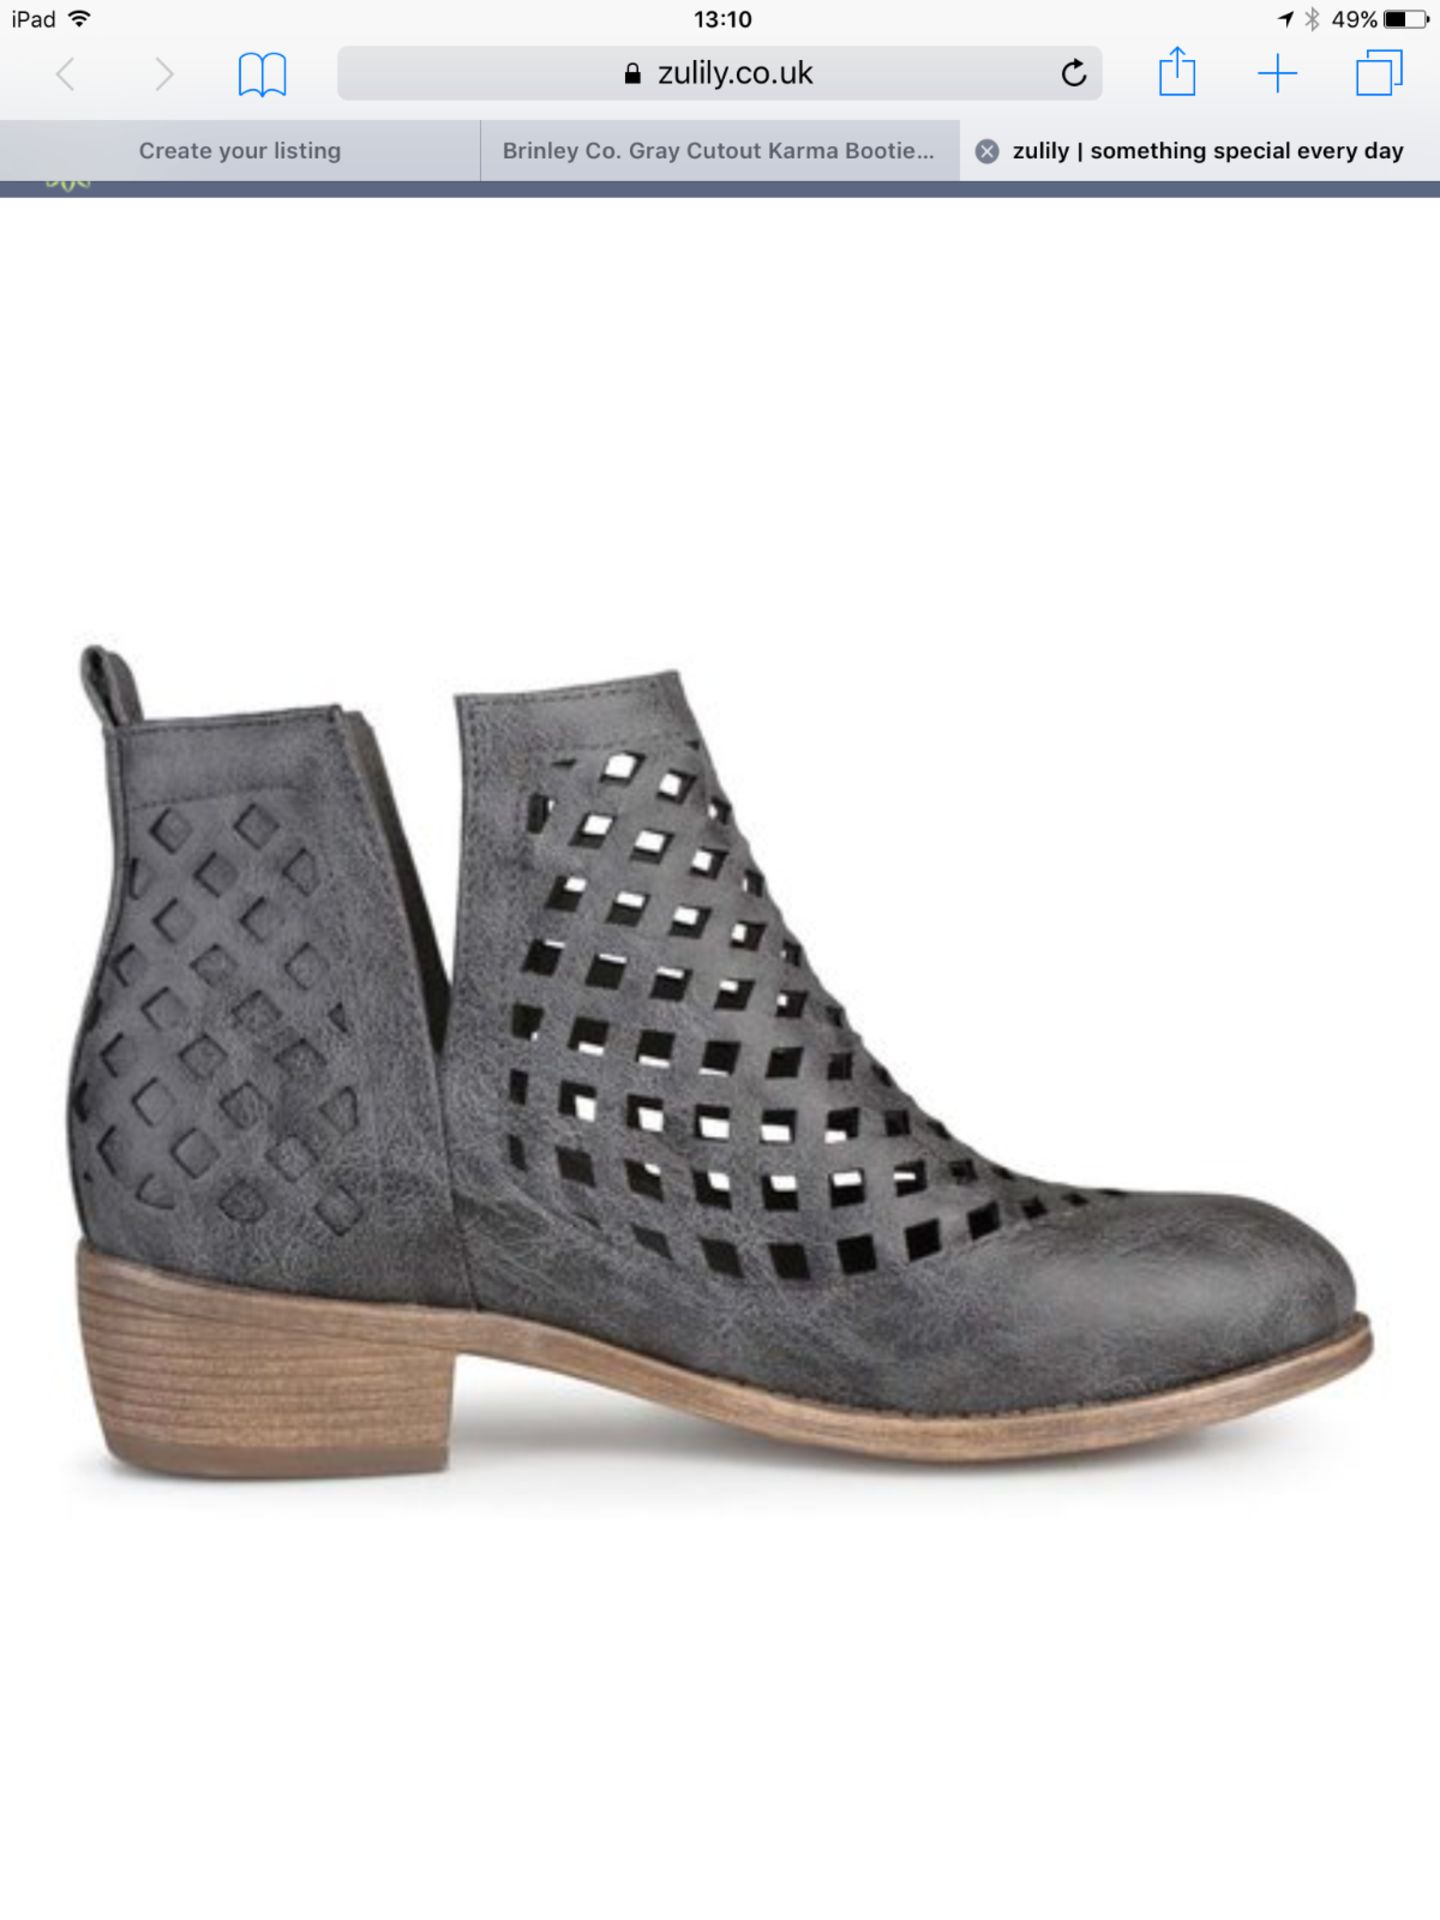 Journee Collection Grey Cutout Karma Kat Bootie, Size US 6/Eur 36.5 RRP £62.99 (New with box) [ - Image 3 of 6